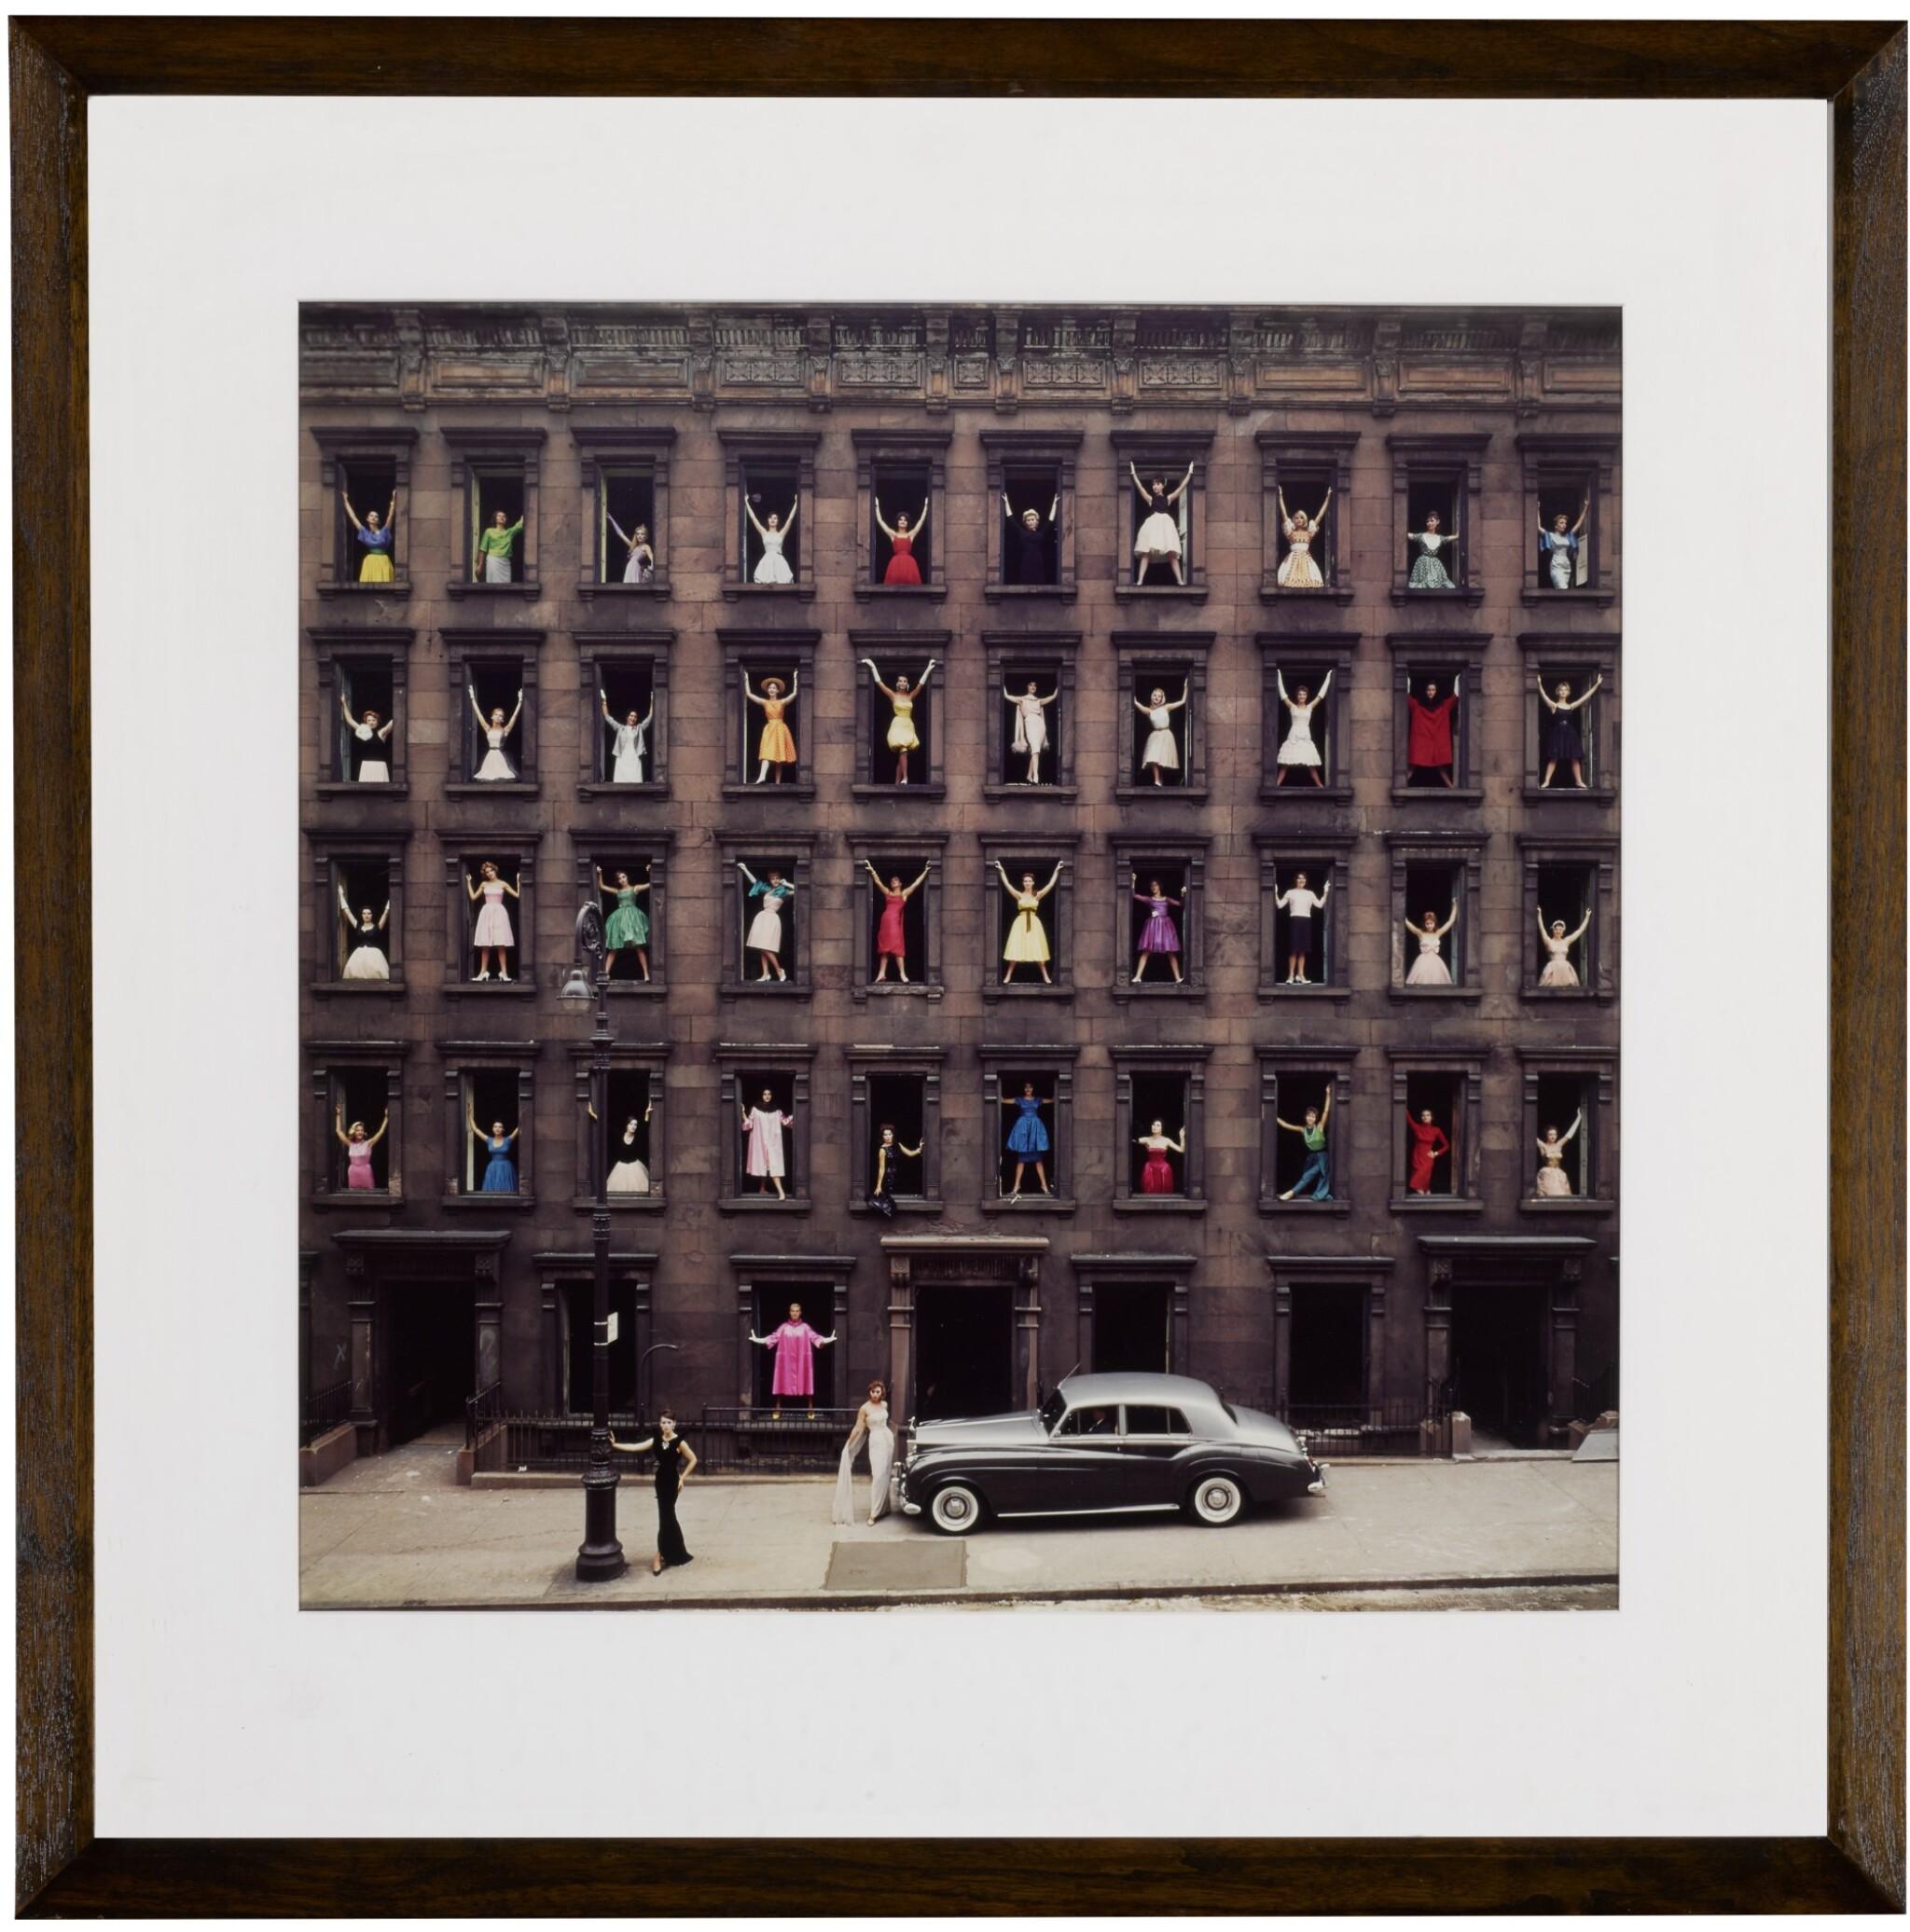 Ormond Gigli
Girls in the Window, 1960 (printed later)
Color coupler print
16 x 16 inches
edition of 100
Signed, numbered and dated by the artist

Ormond Gigli: The Visionary Behind the 